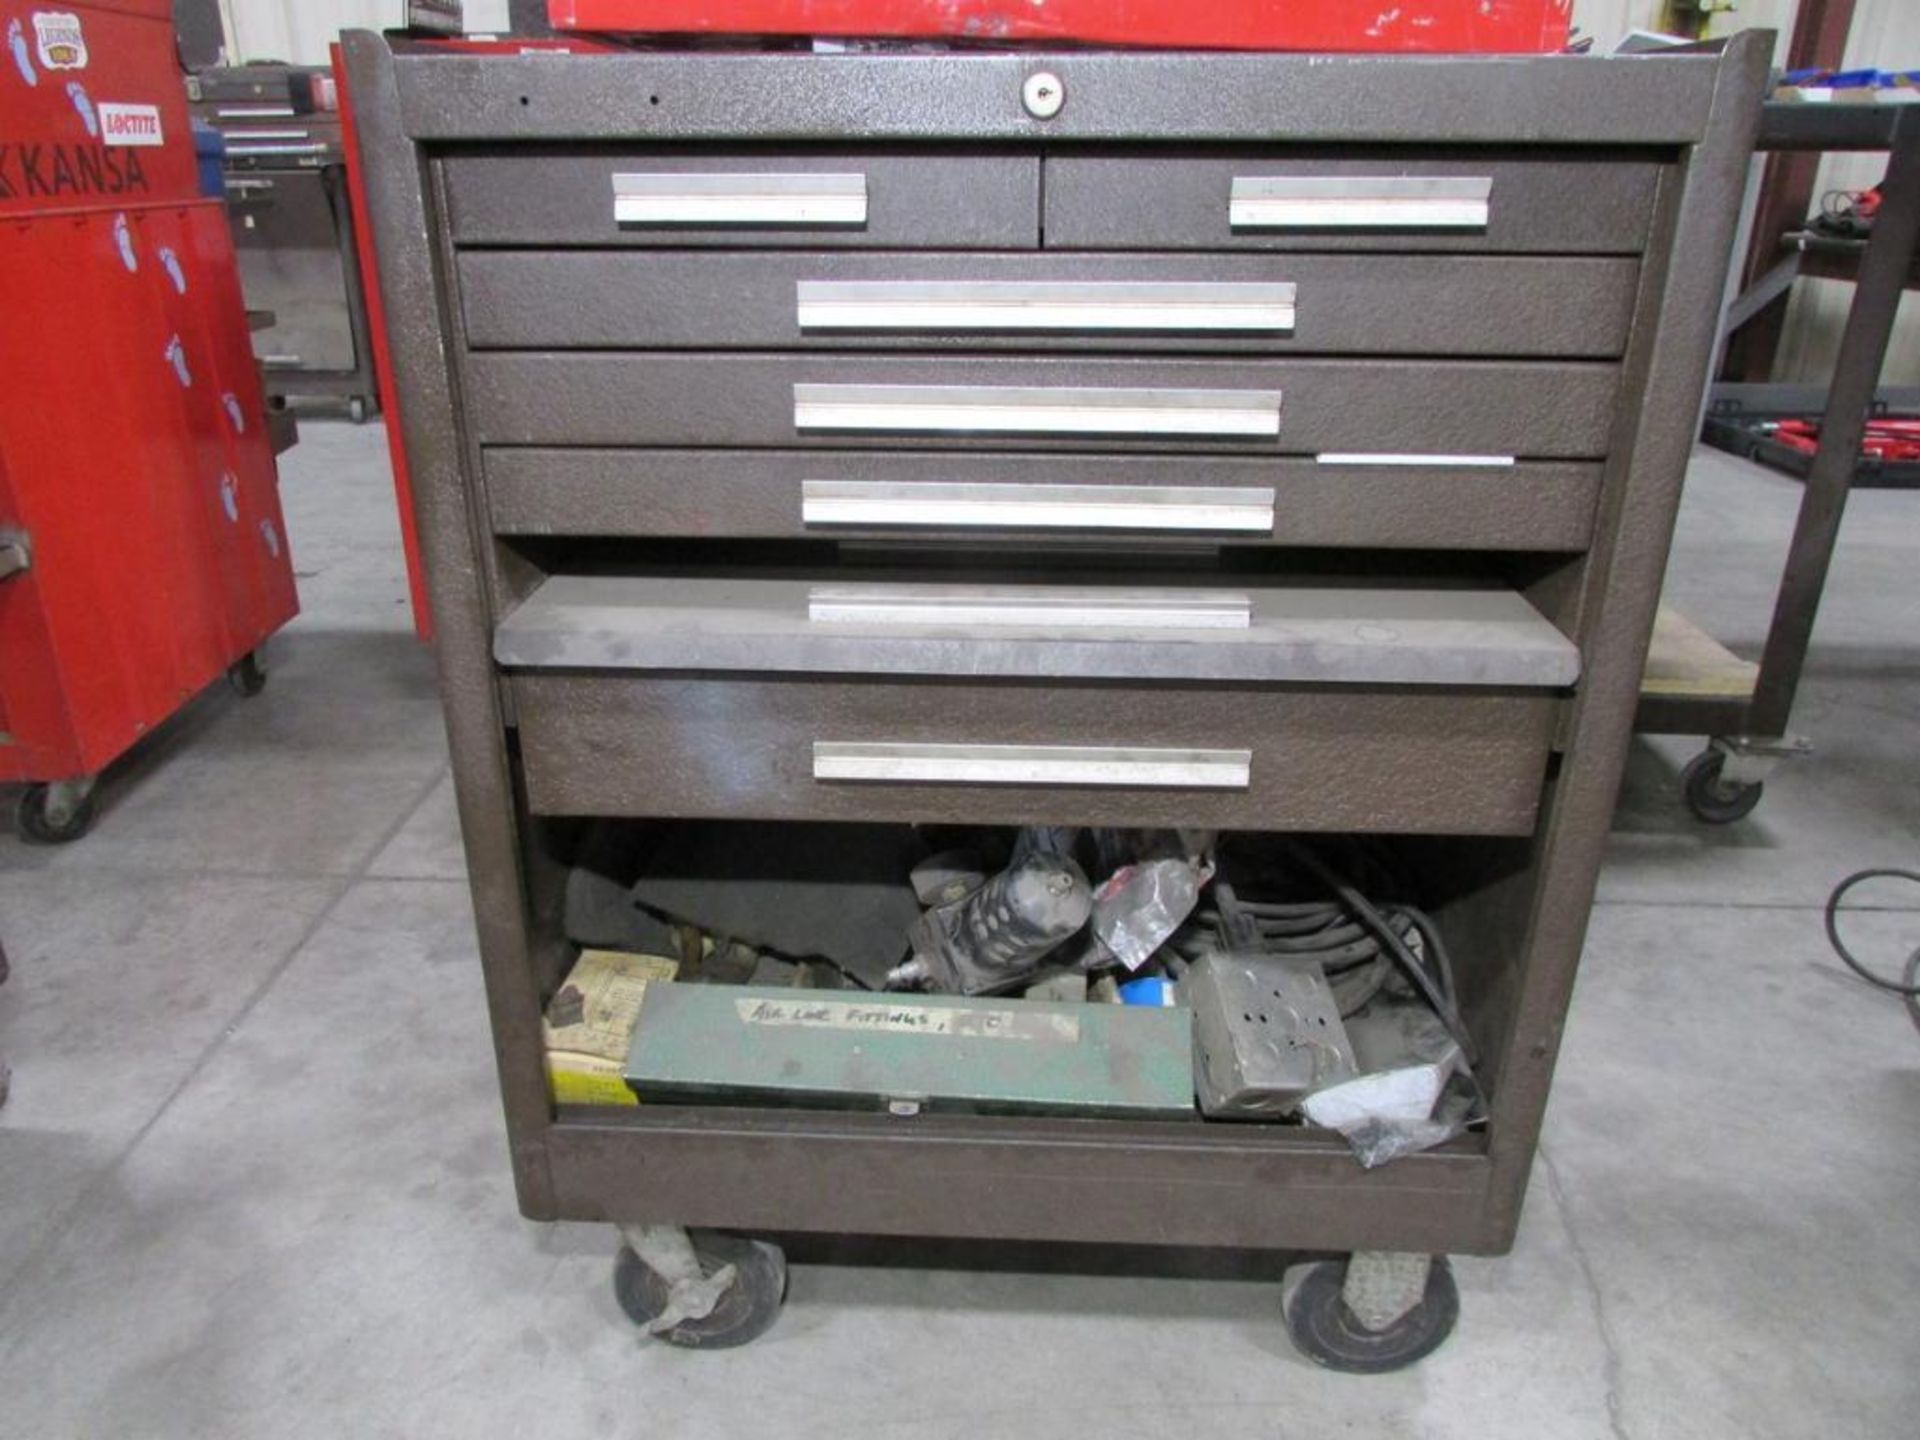 Kennedy 6-Drawer Rolling Tool Box with Open Top Tool Box, Assorted Hand Tools and Contents - Image 2 of 7